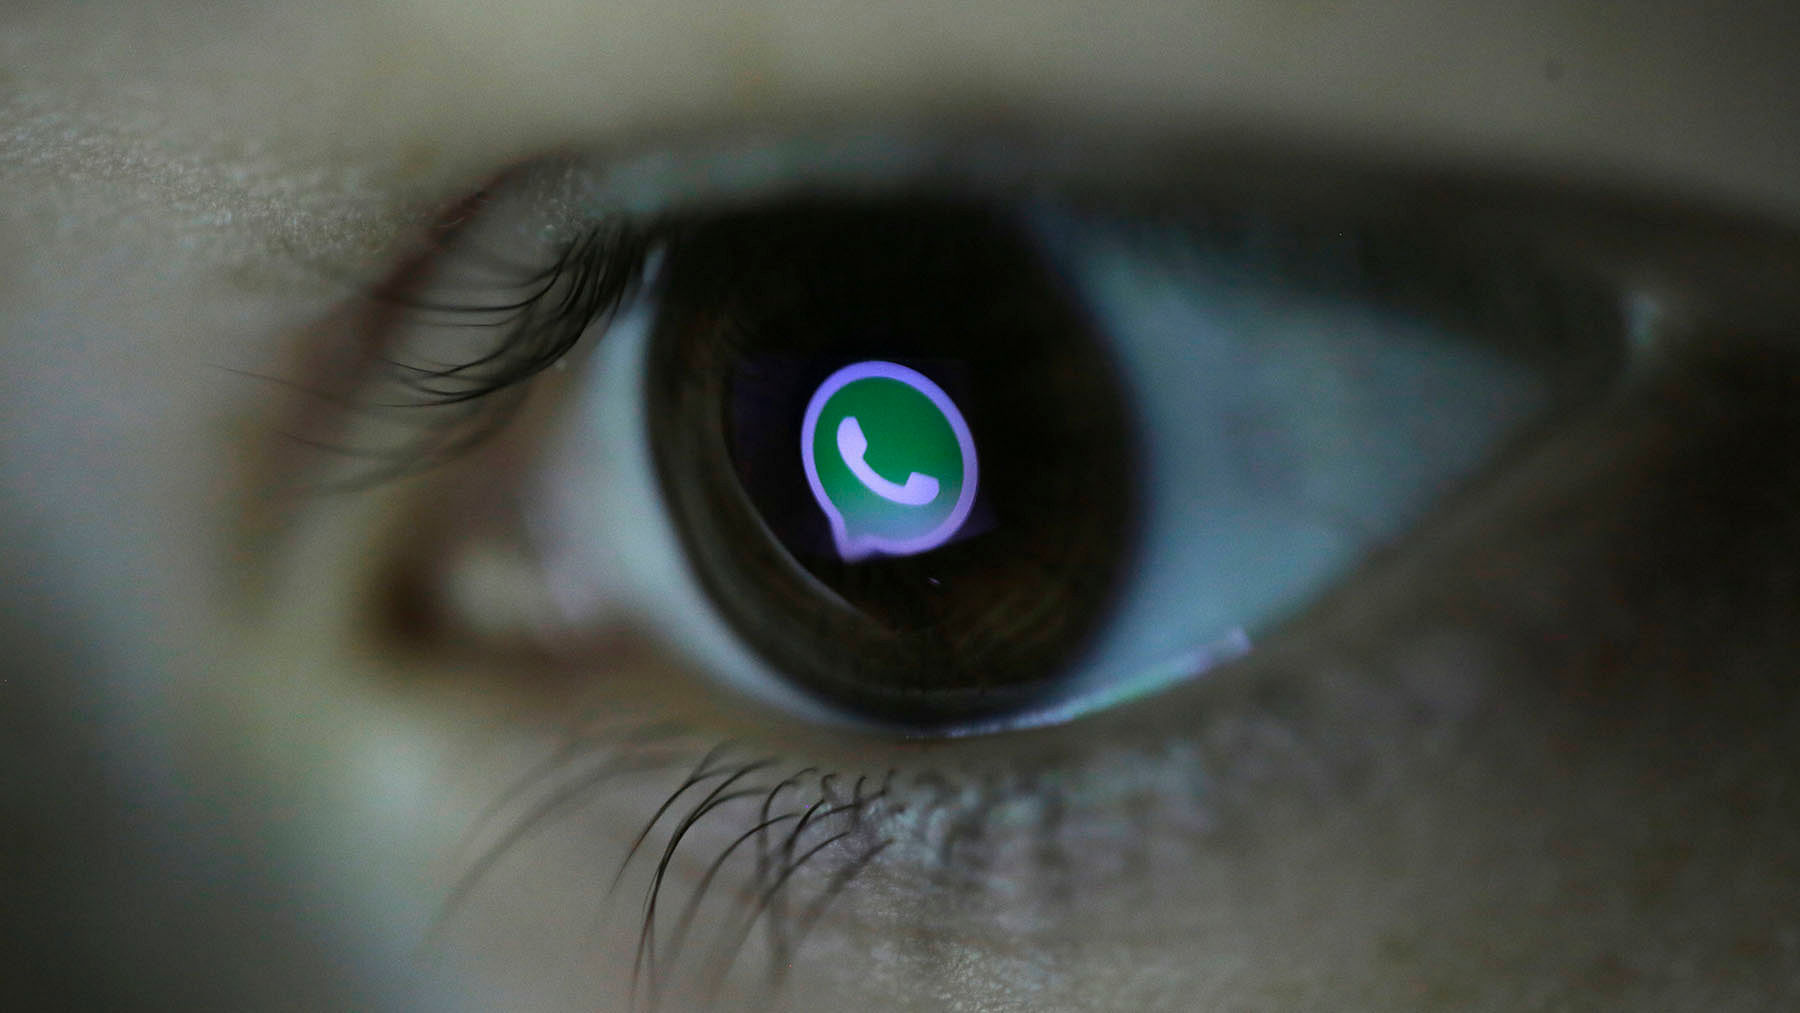 WhatsApp is adding an additional security feature for Android OS.